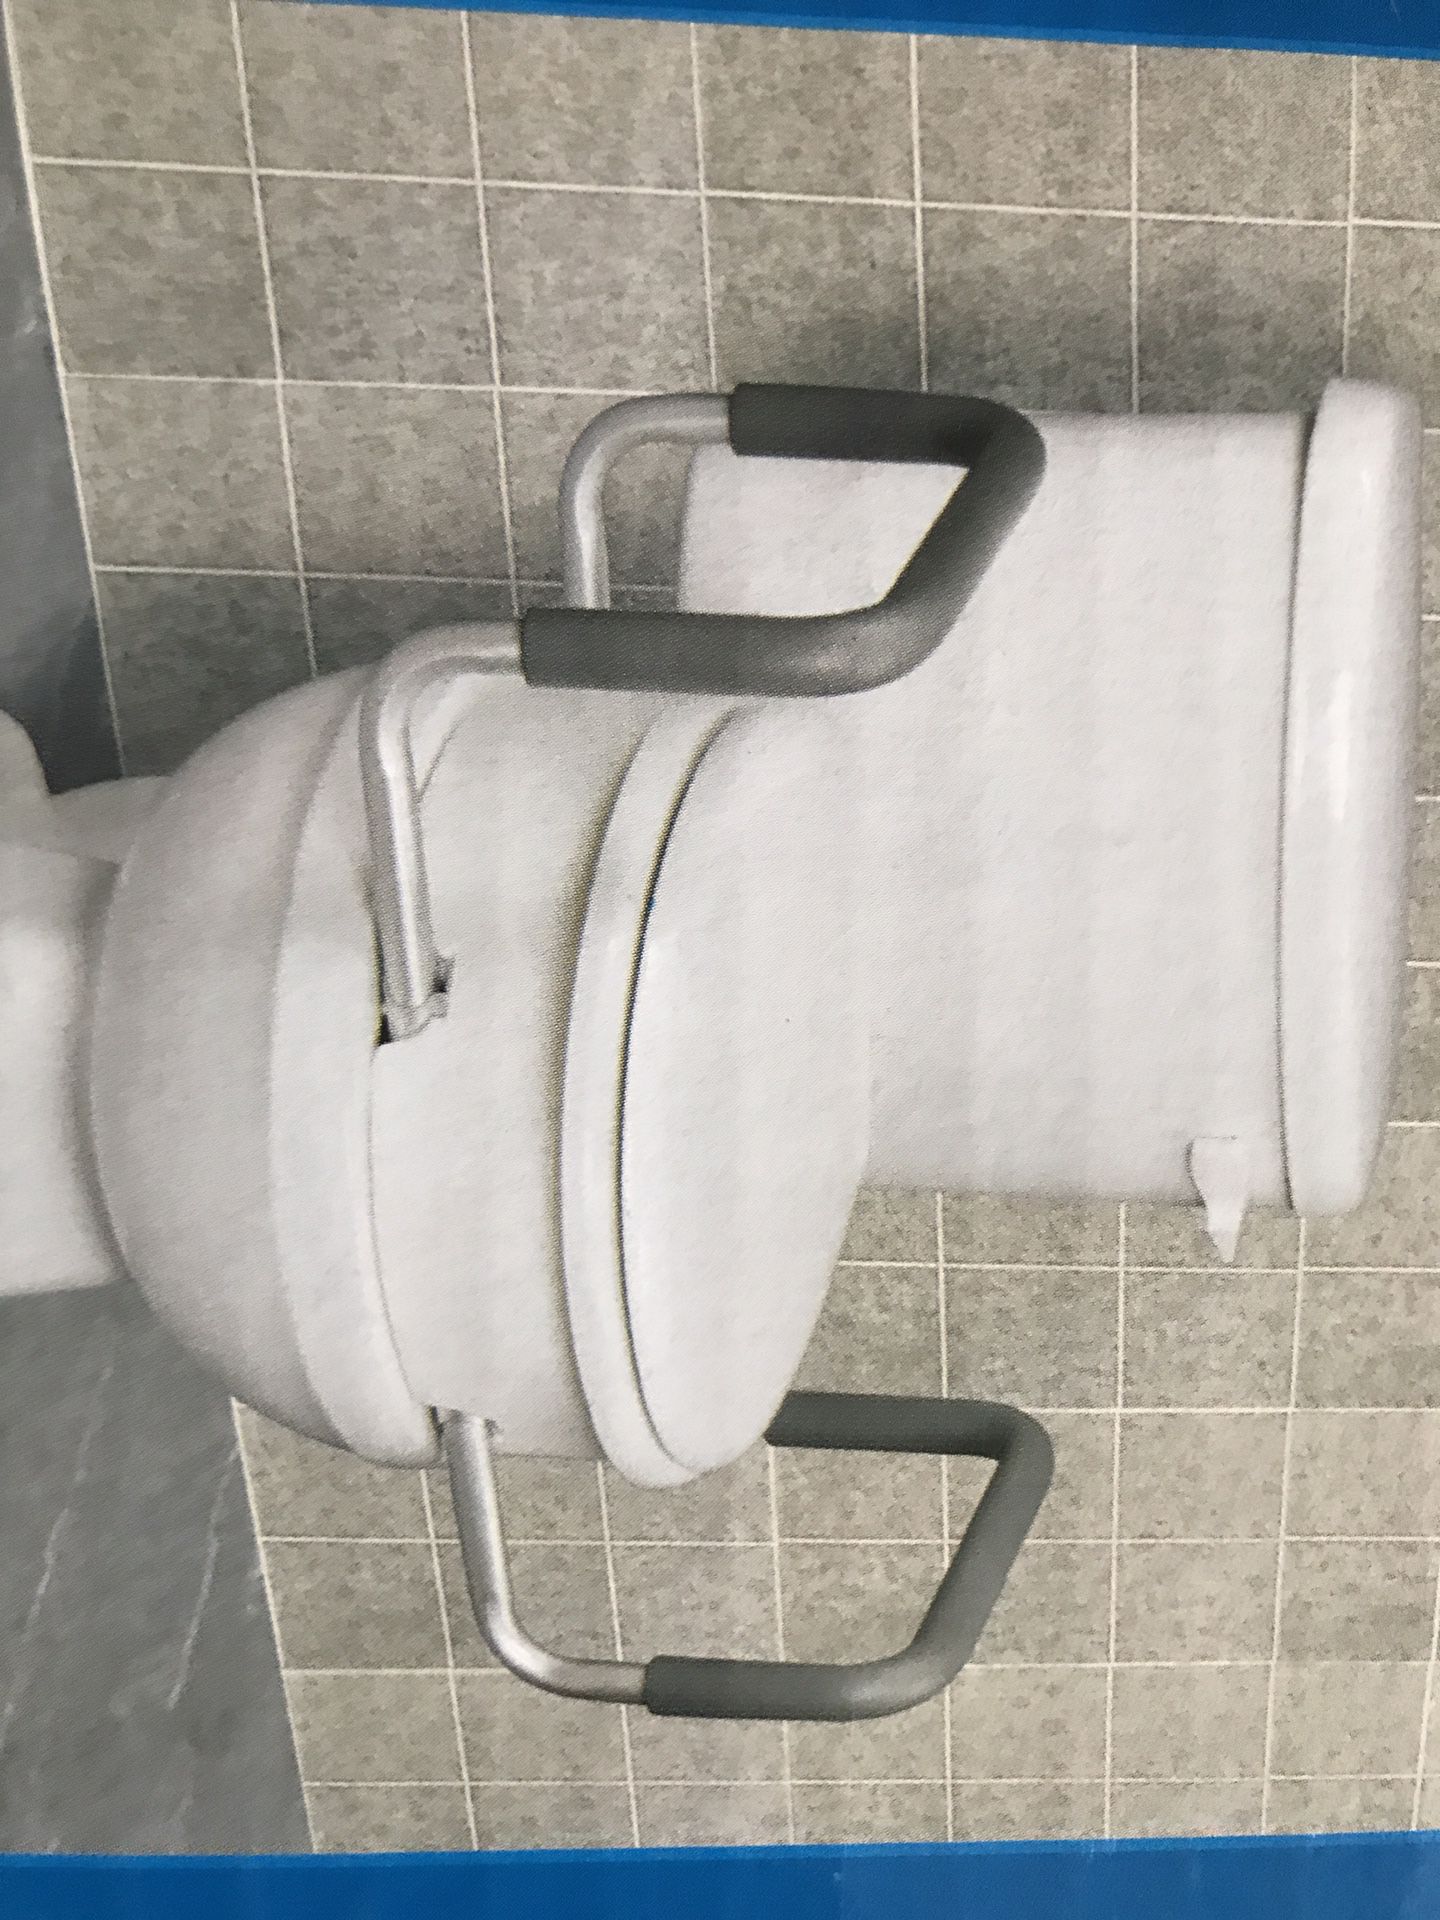 New Toilet seat elevator with Handles